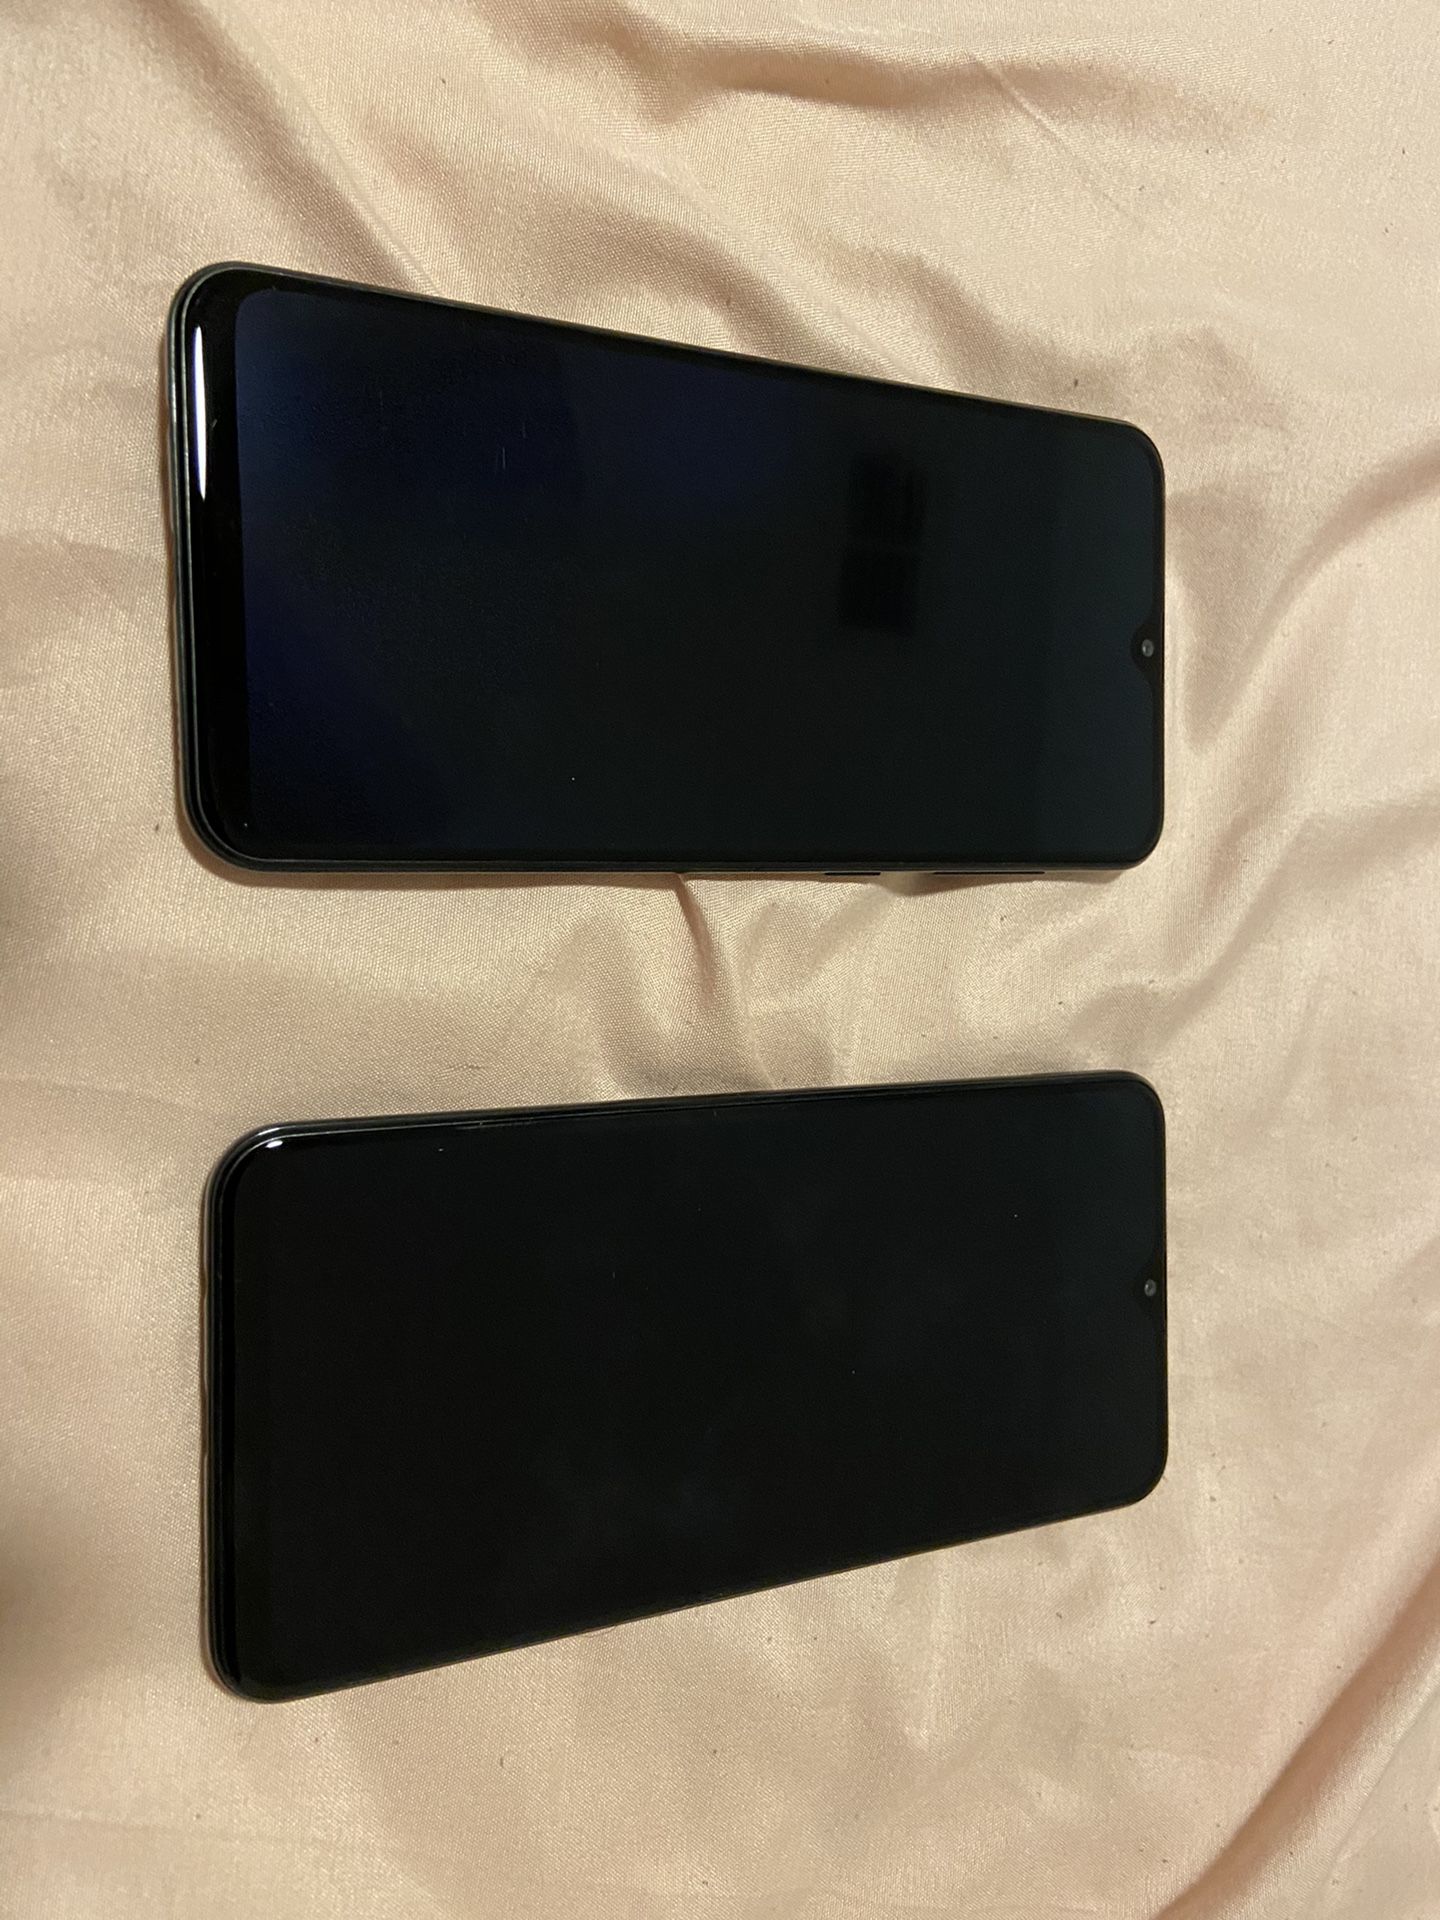 2 Samsung Galaxy A20 T-Mobile for sell!